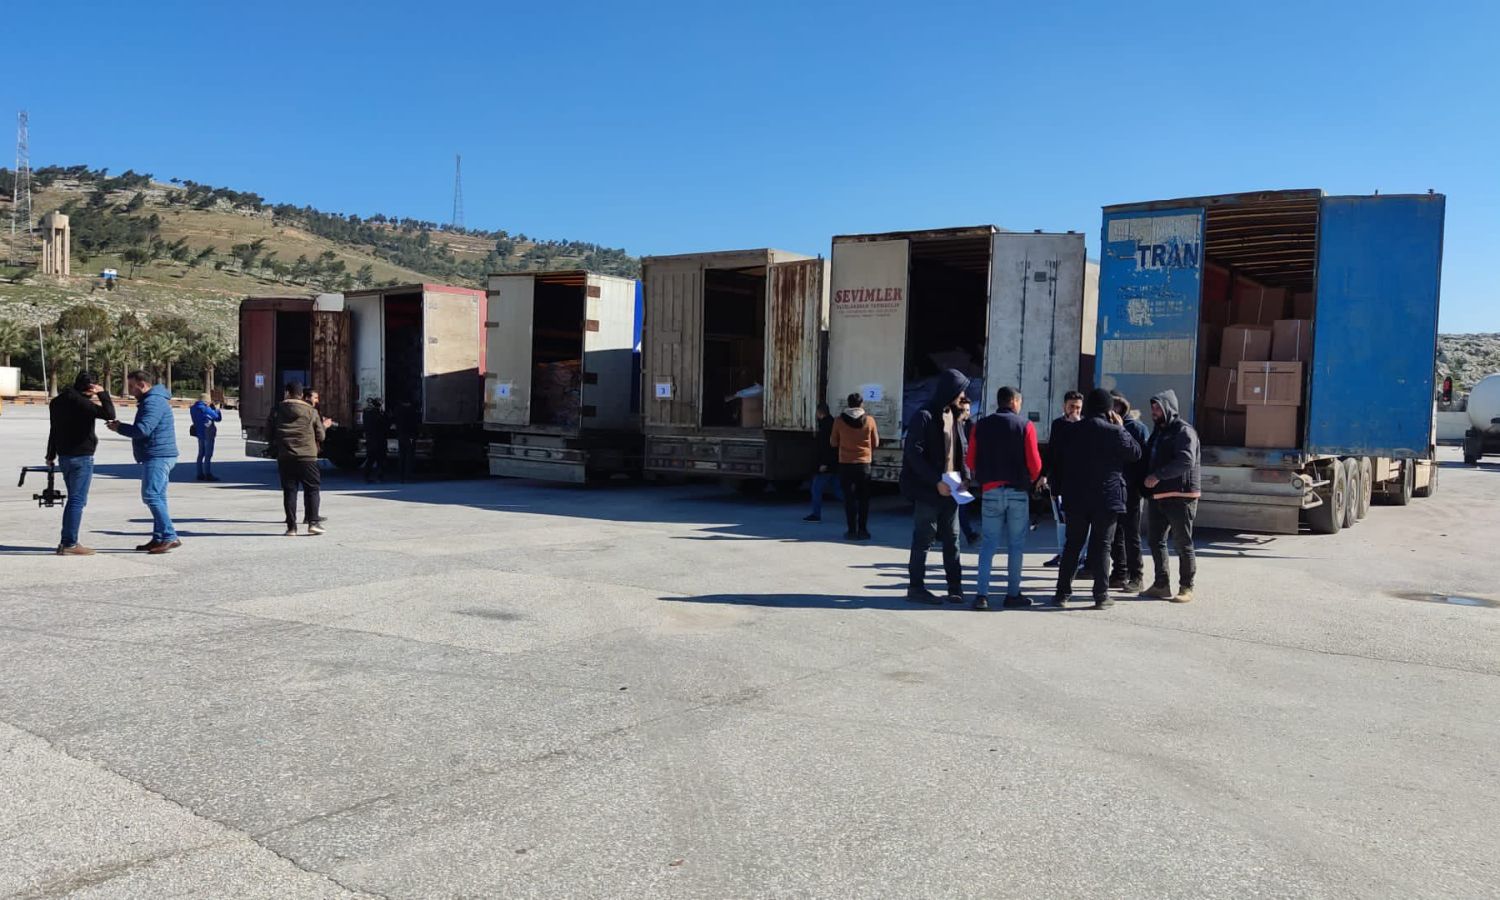 Six UN trucks carrying medical aid arrived at the Bab al-Hawa border crossing with Turkey - February 9, 2023 (Twitter/Milad Fadel)